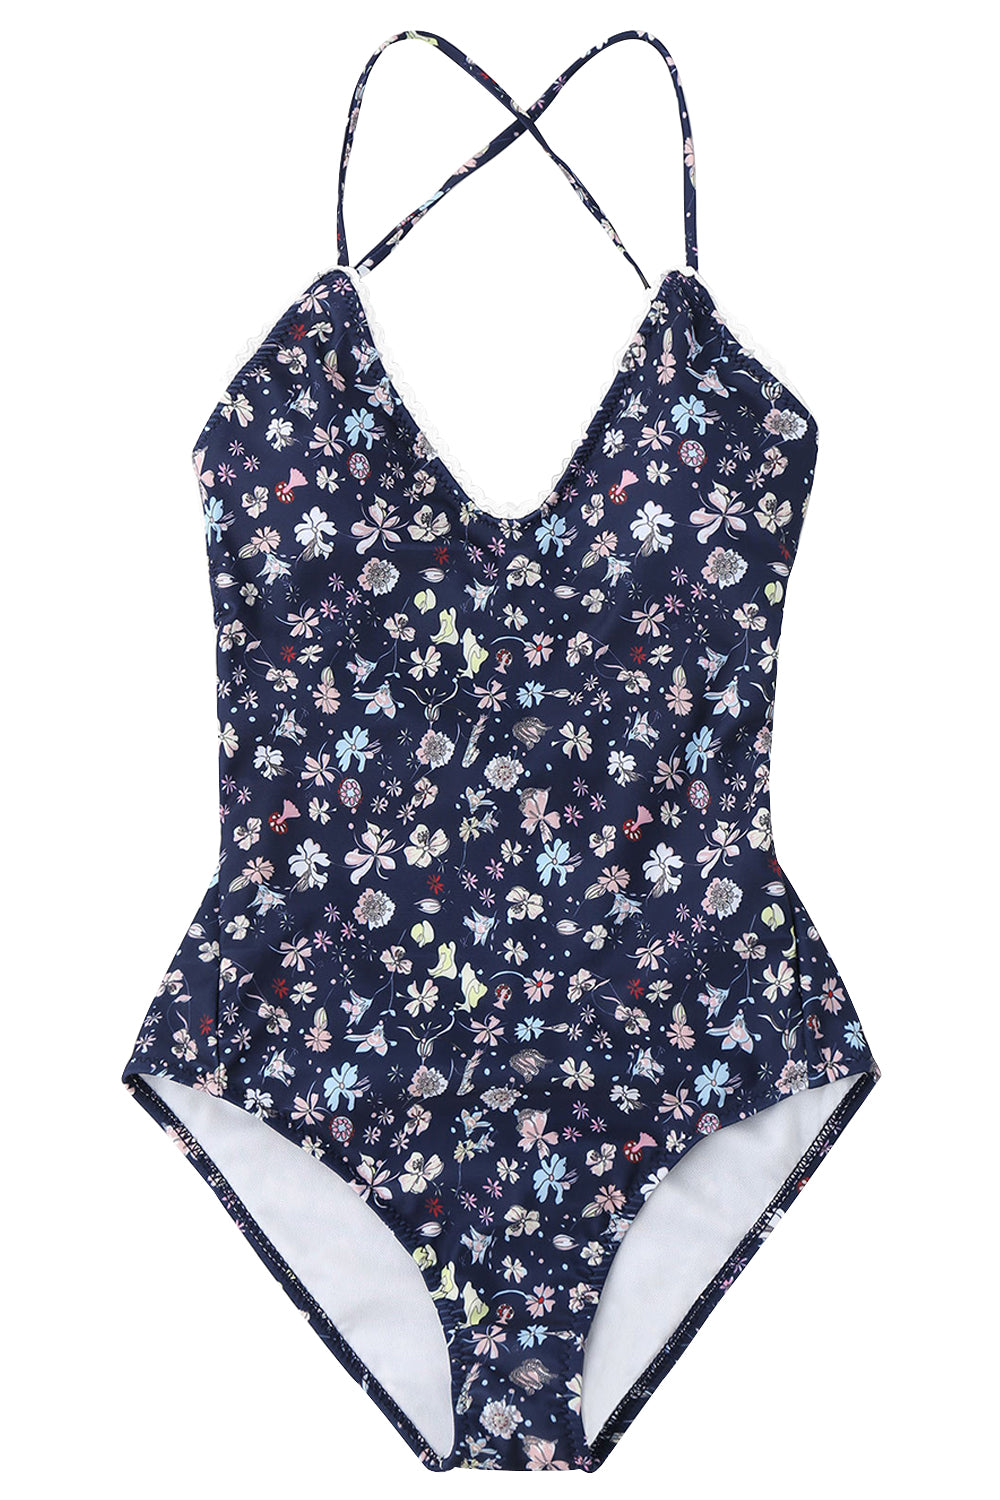 Iyasson Floral Print Backless One-piece Swimsuit